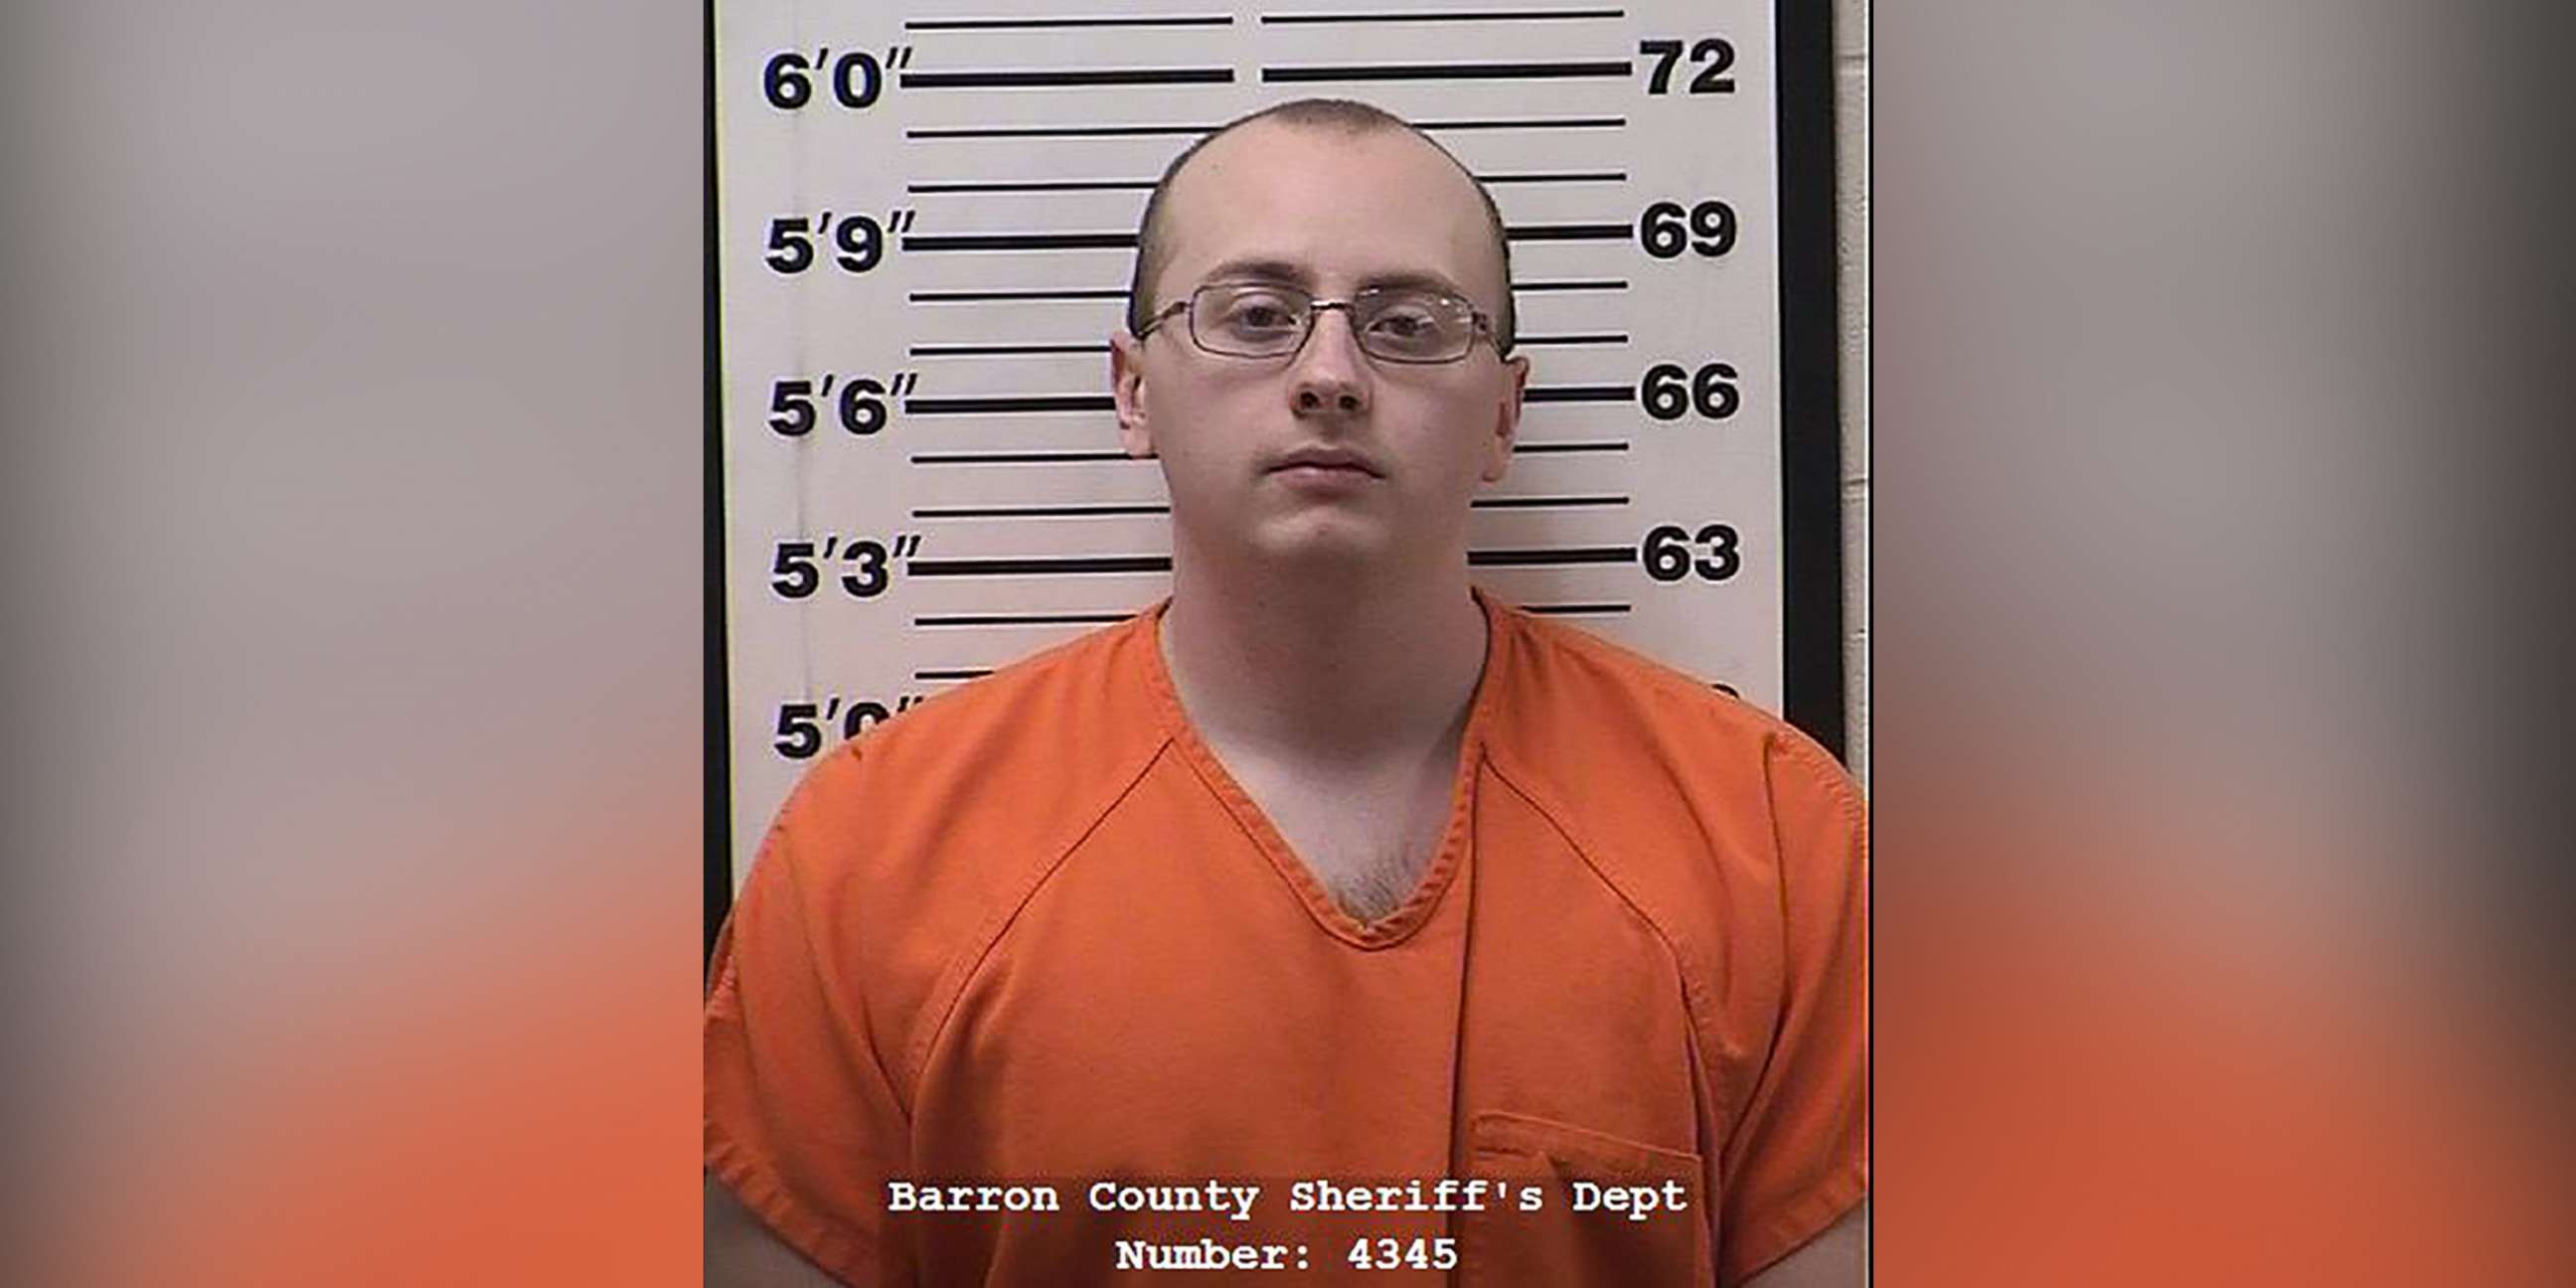 PHOTO: Jake Thomas Patterson is pictured in a booking photo released by the Barron County Sheriff's office in Wisconsin.